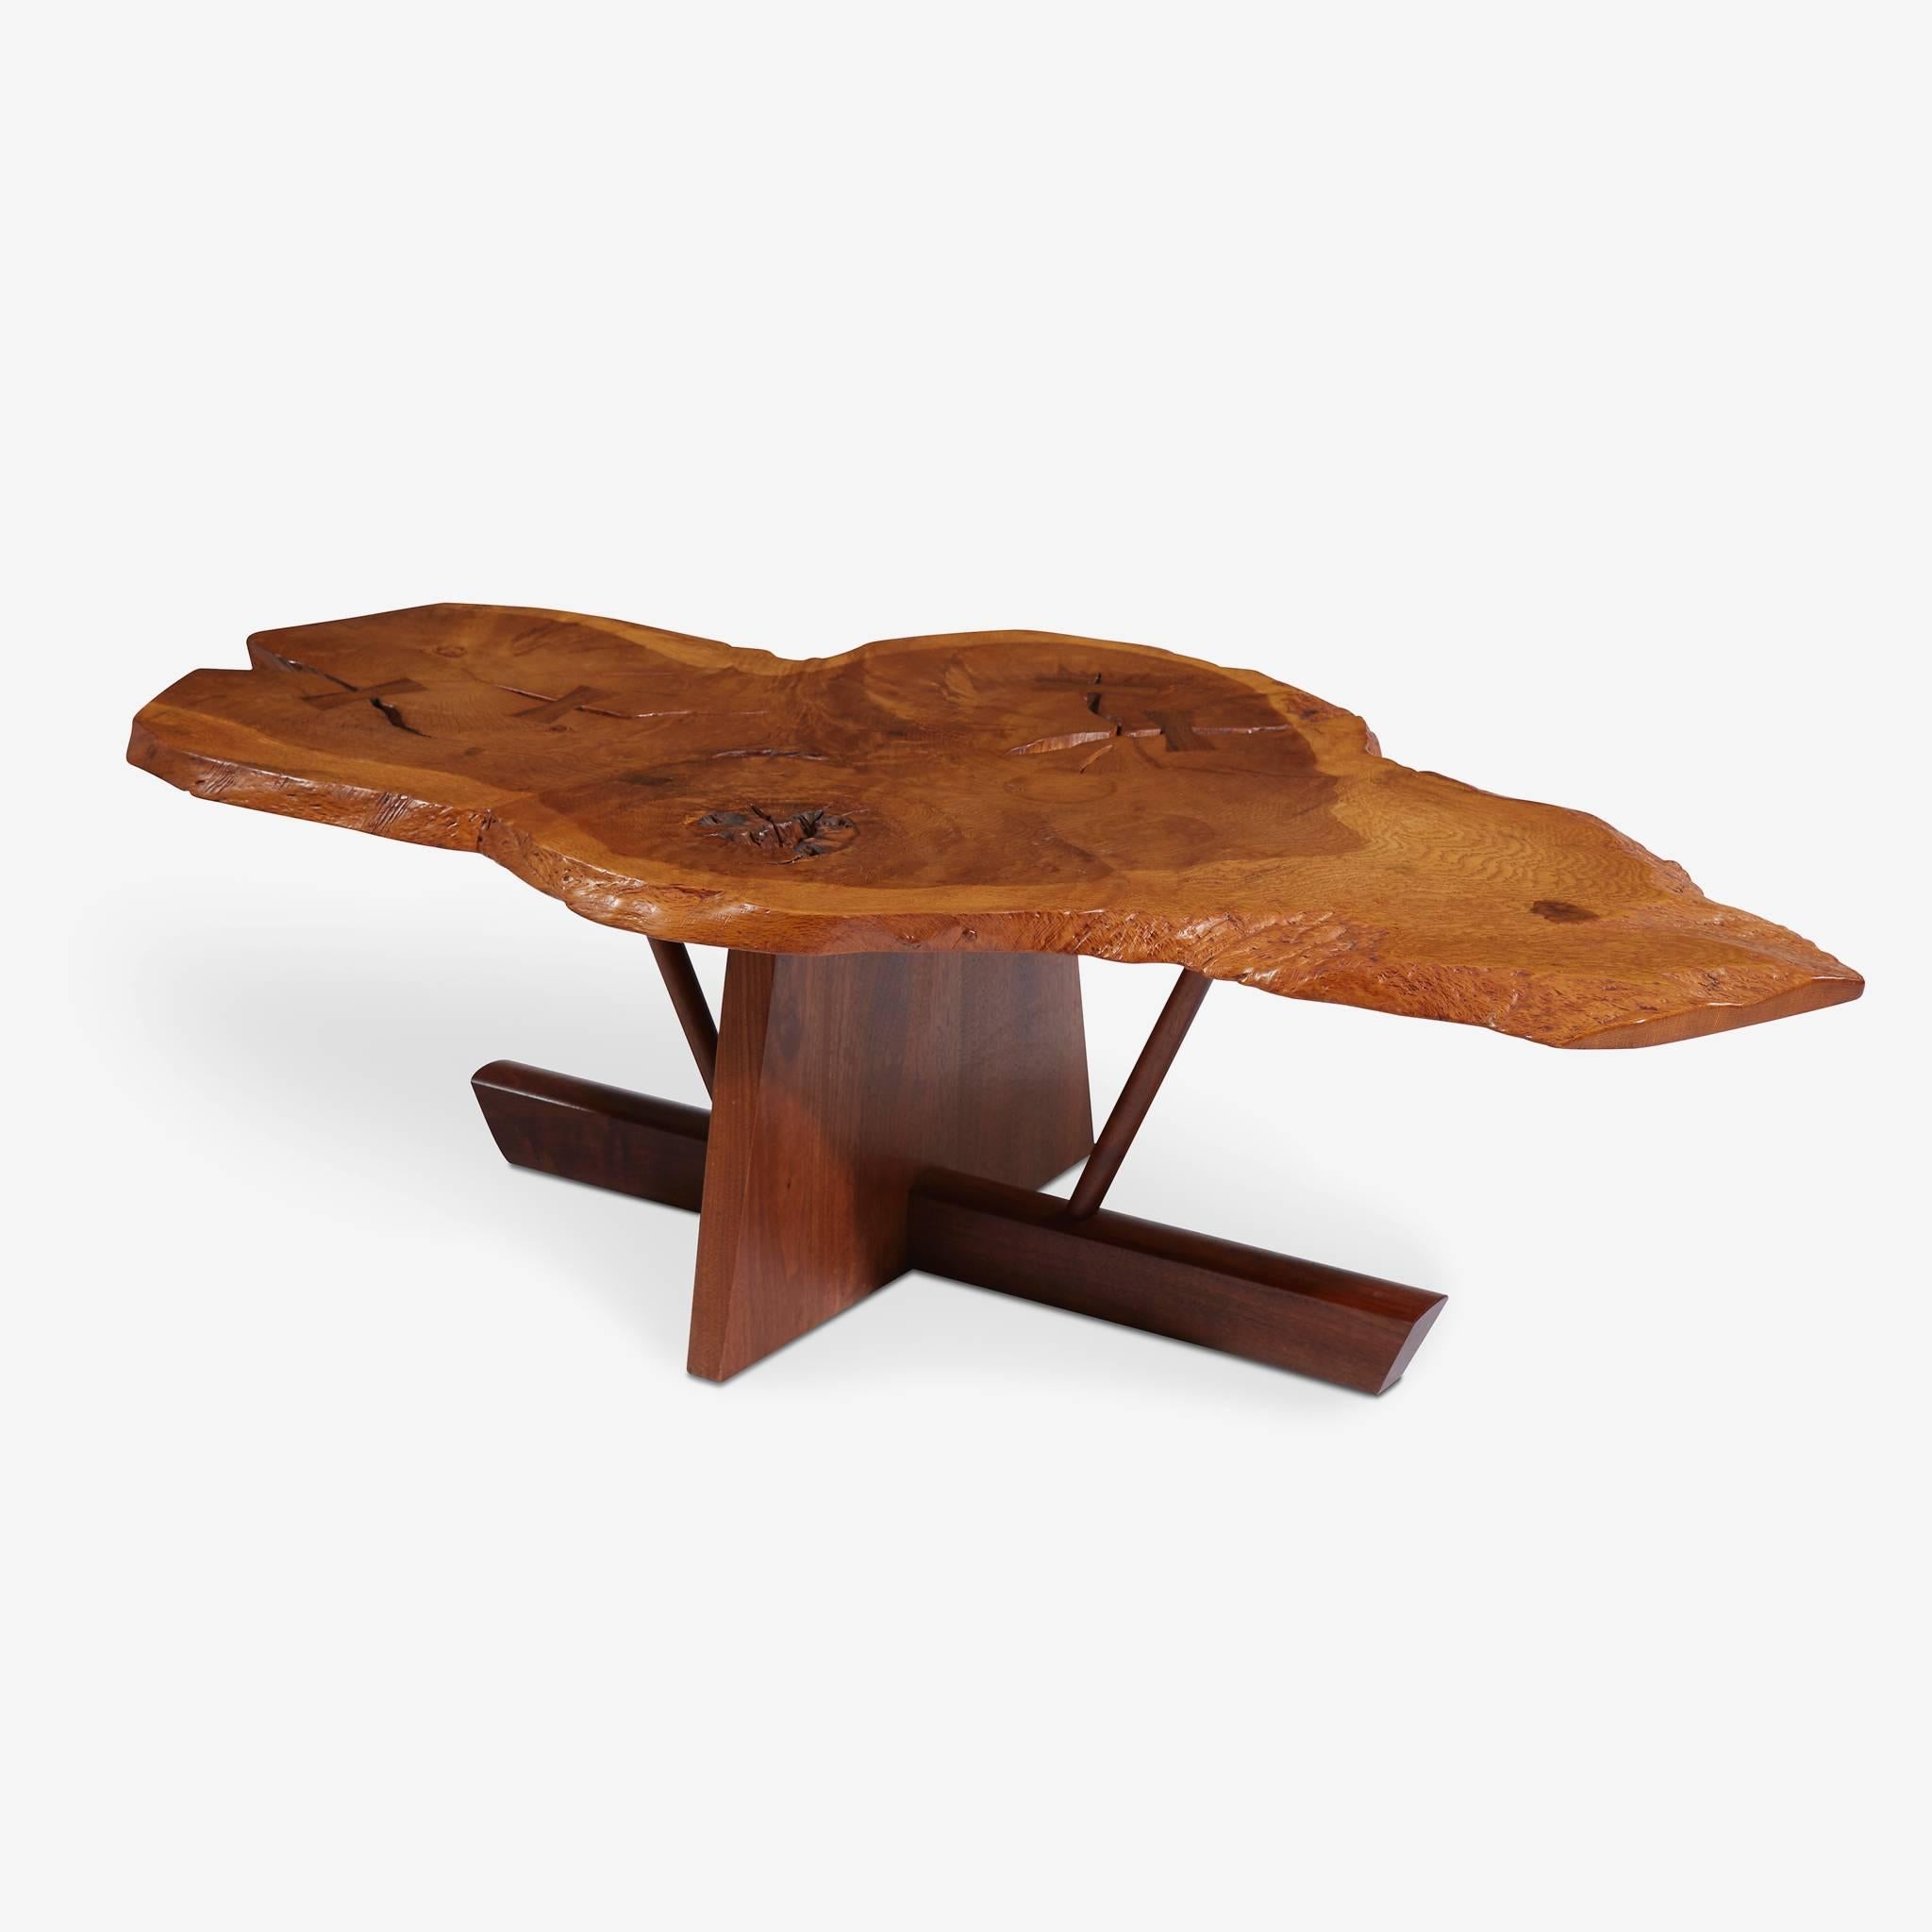 A wonderful collaboration from father and daughter George and Mira Nakashima. This table was custom-made and acquired from it's original owner.